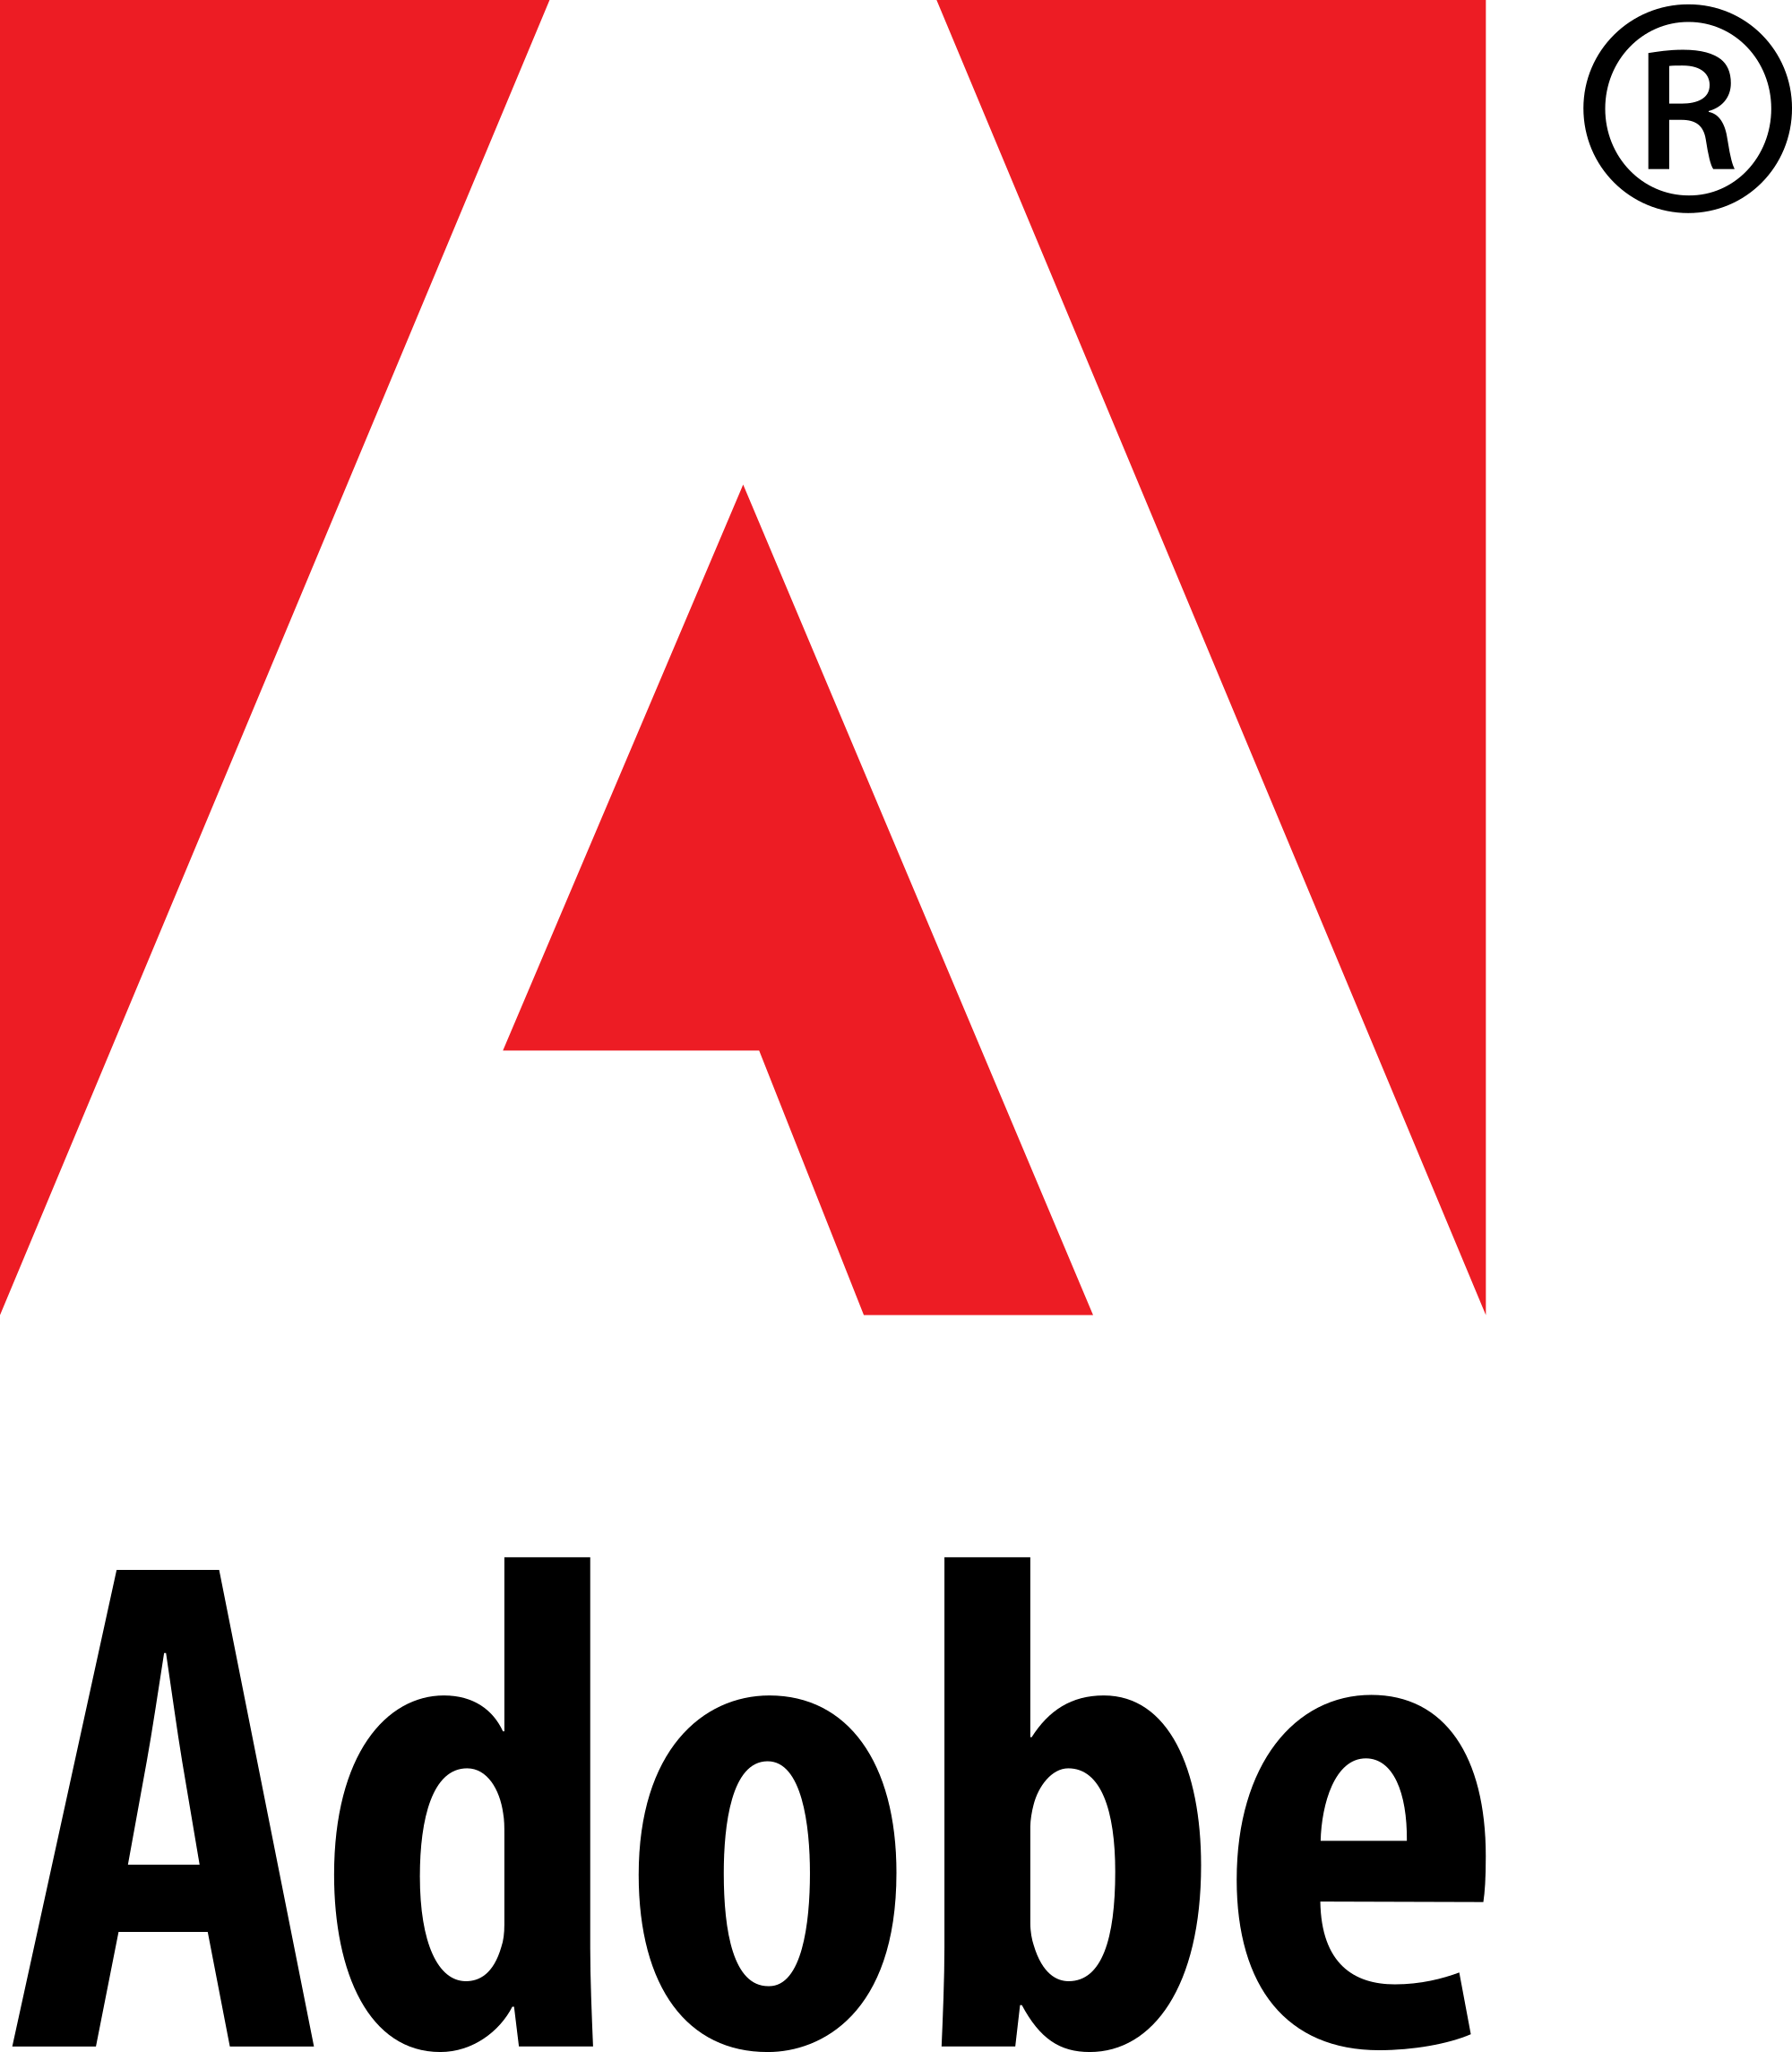 Red a Logo - File:Adobe Systems logo and wordmark.svg - Wikimedia Commons